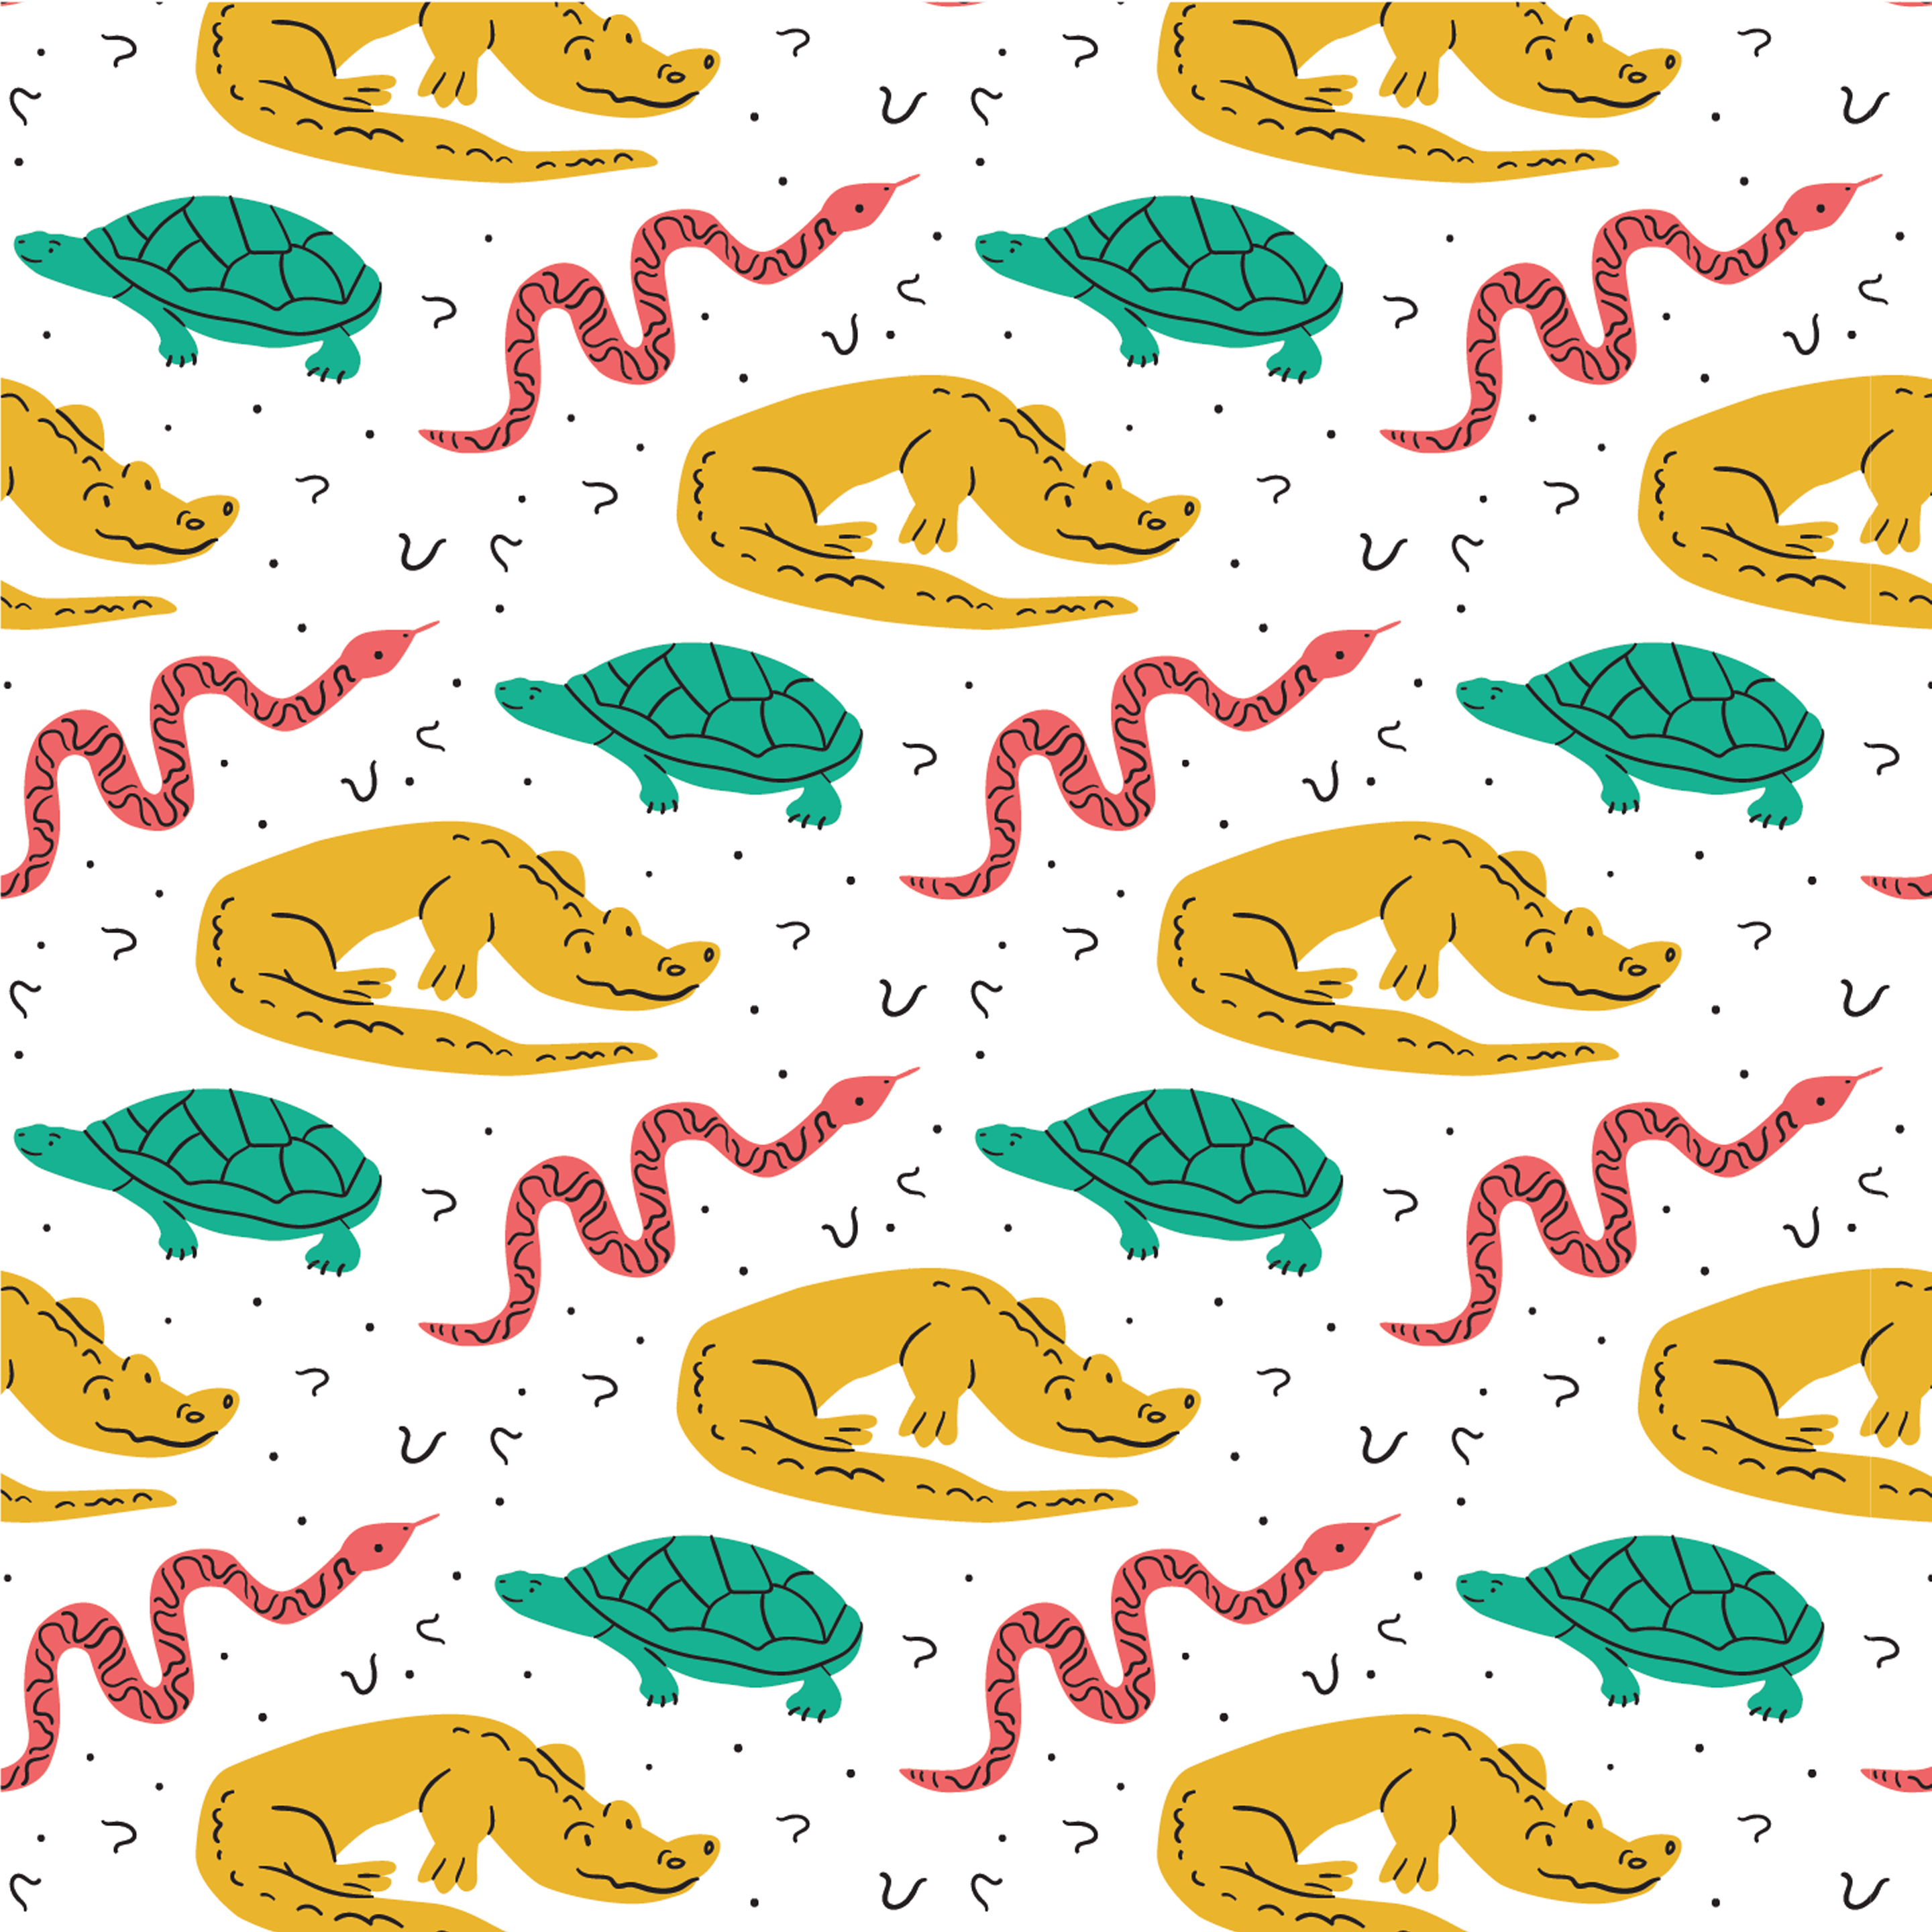 Colorful Reptiles Pattern